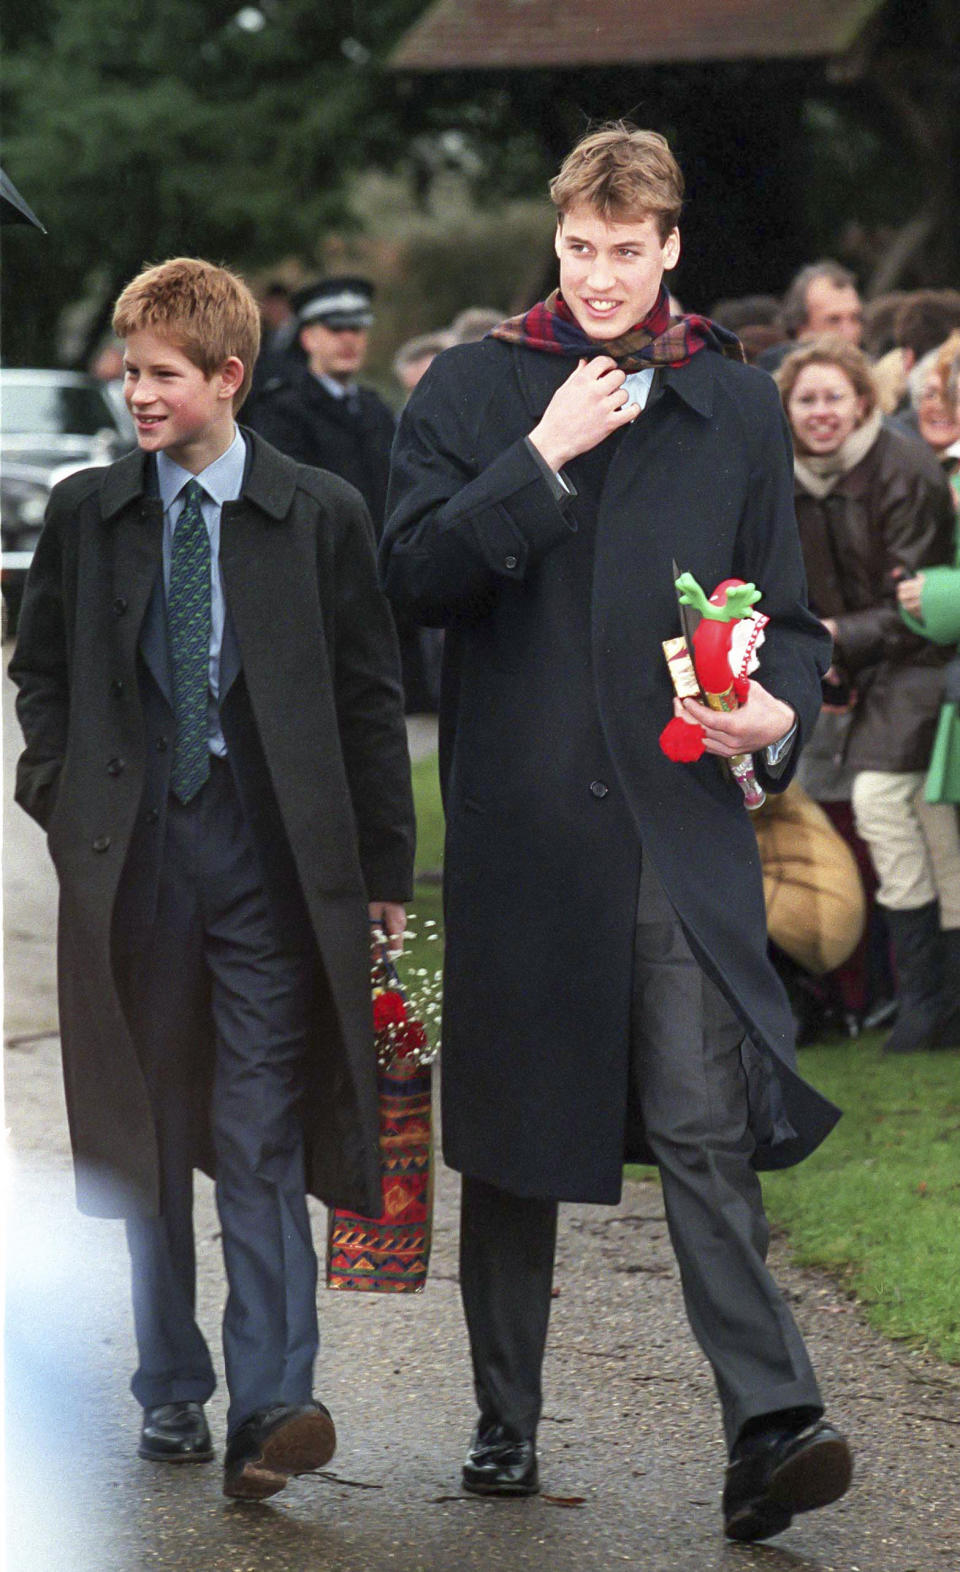 Prince Harry, and Prince William walk to the annual Christmas Day service at Sandringham Church, on December 25 1998 in Sandringham, England.